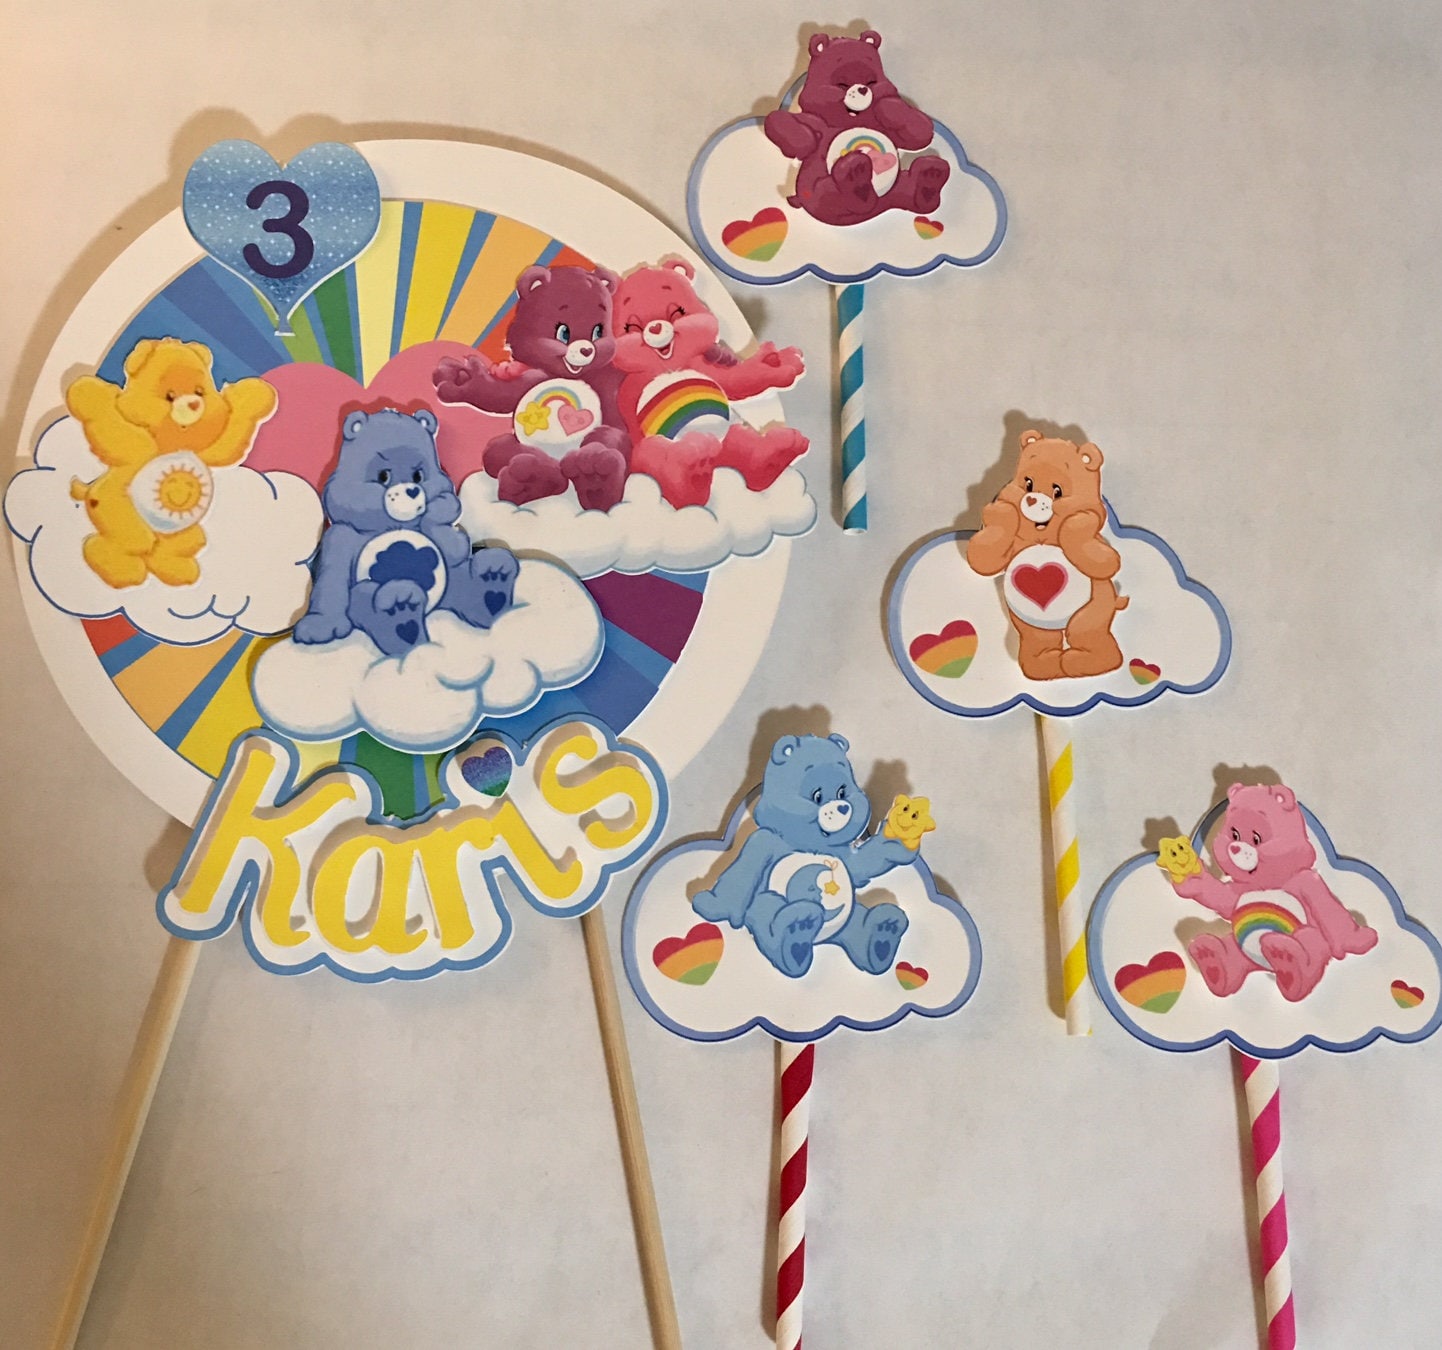  Care Bear Birthday Party Supplies